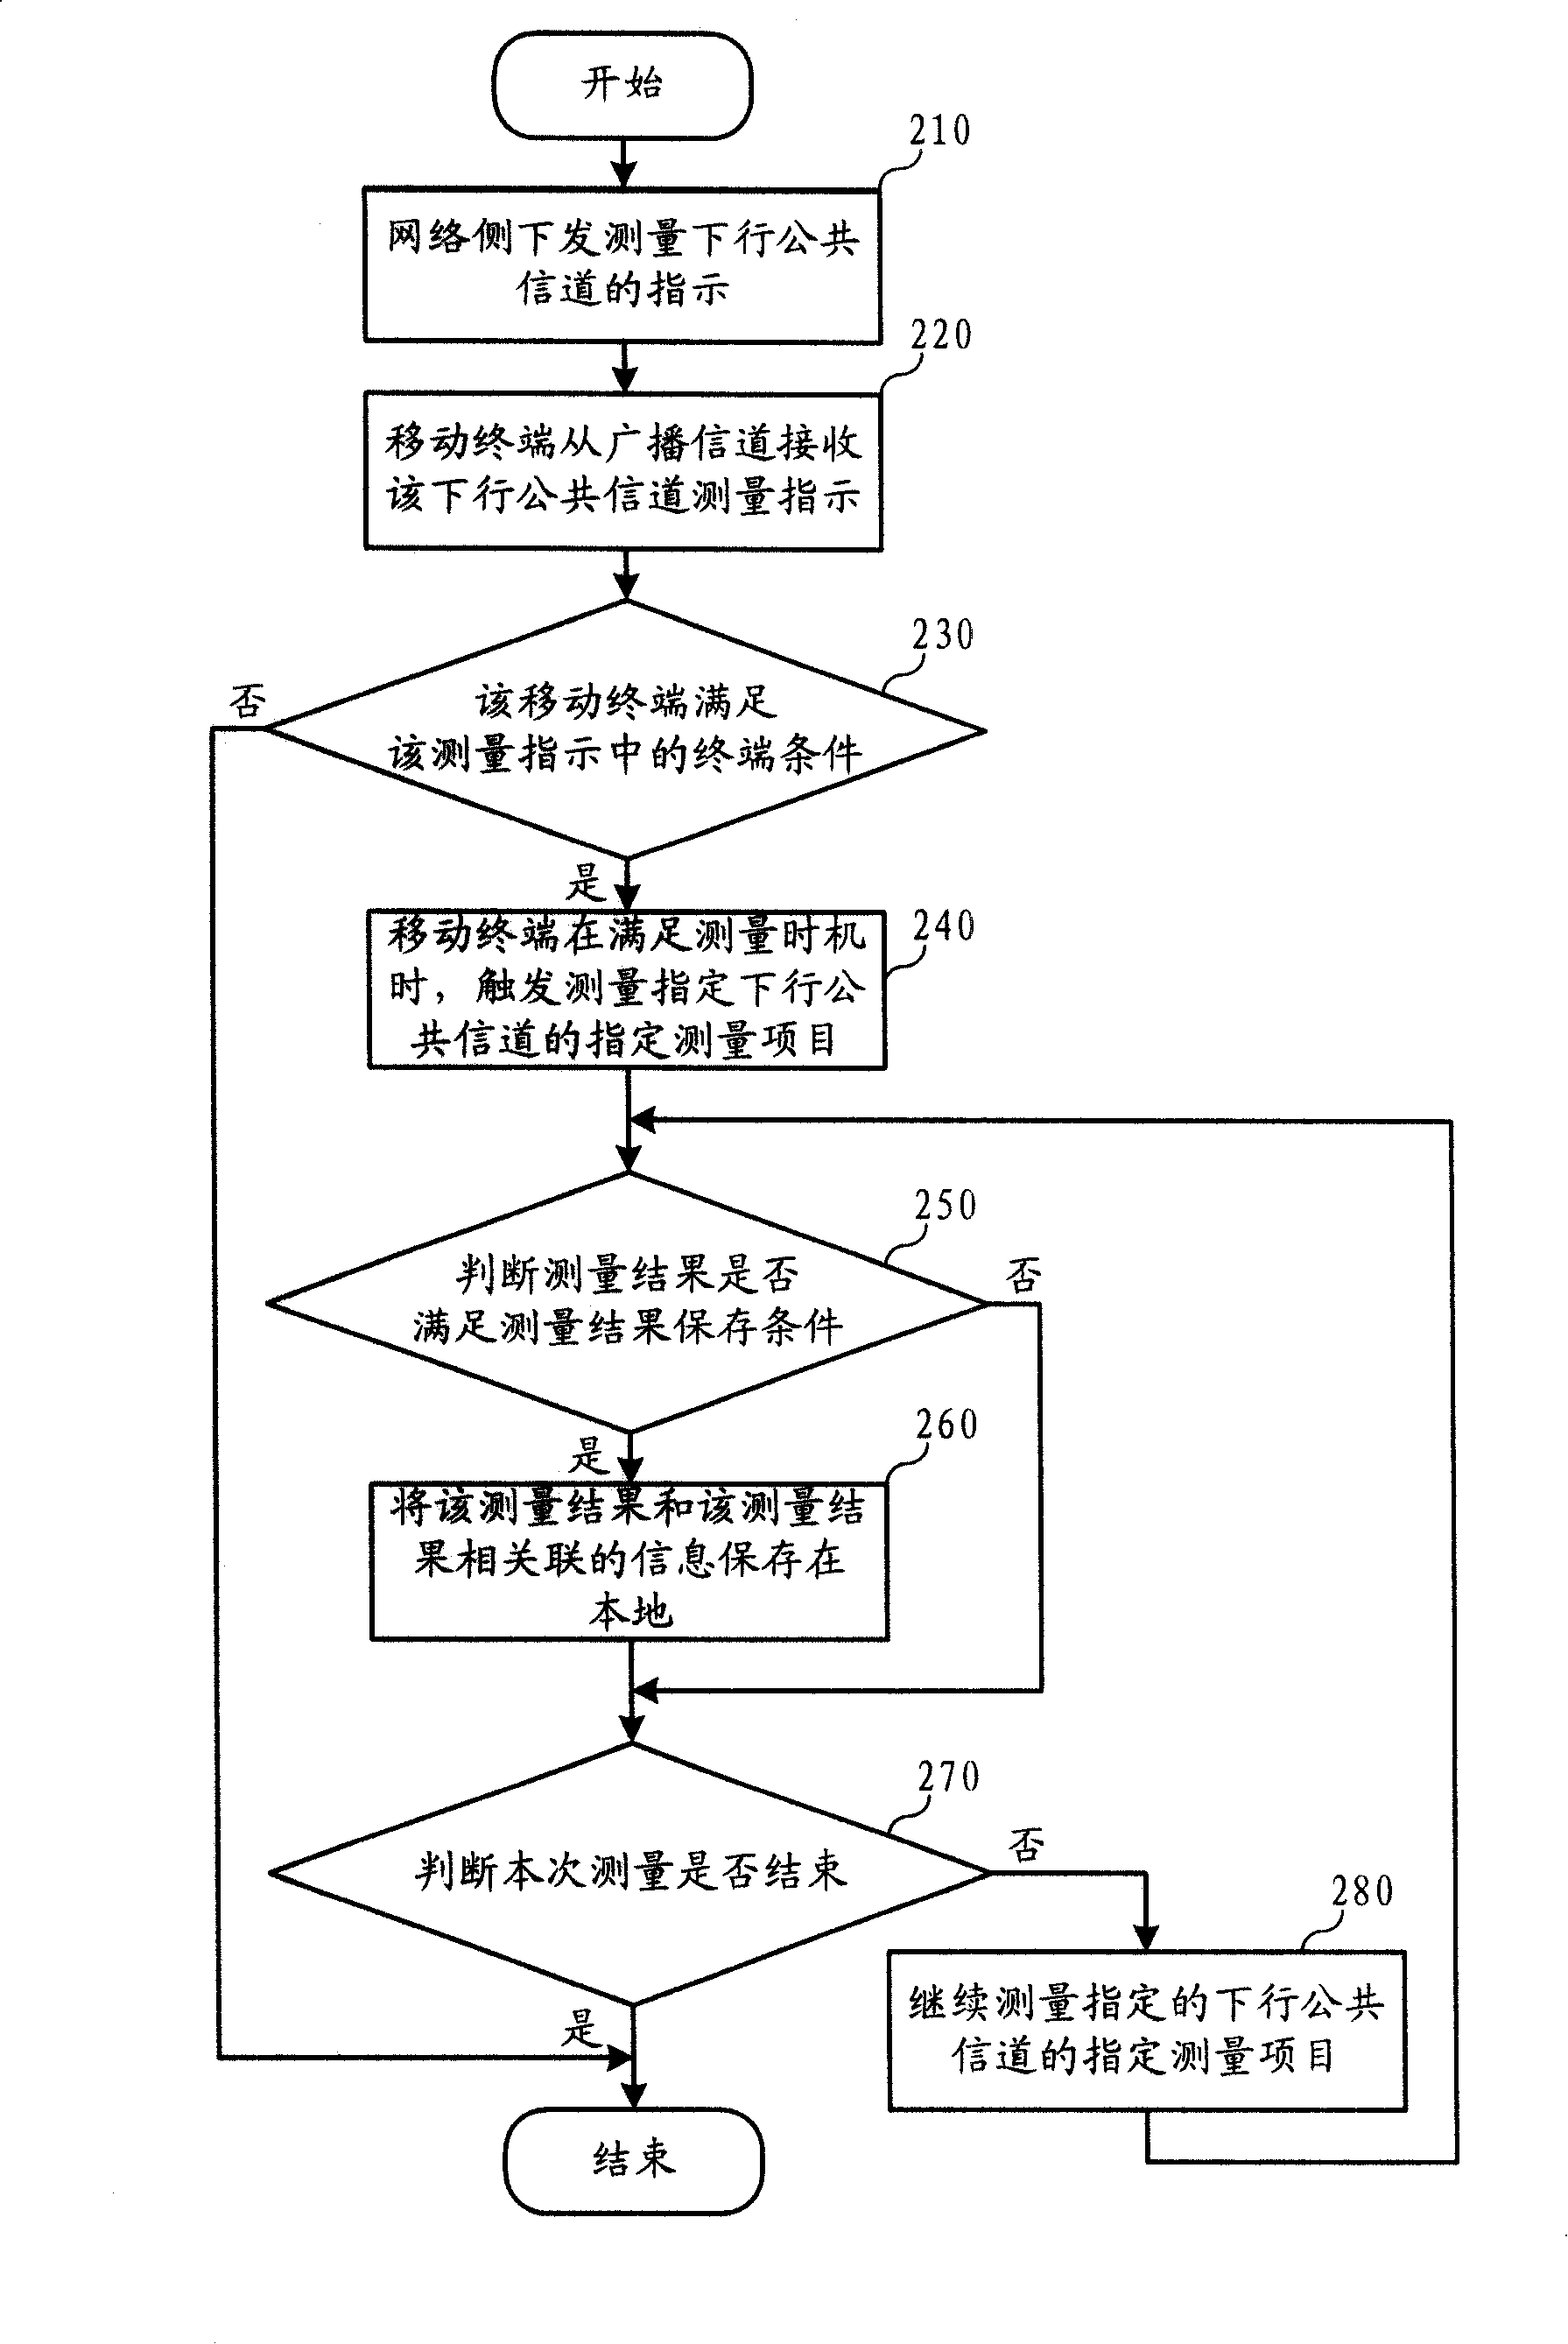 Descending common signal channel measuring method, system, equipment and terminal